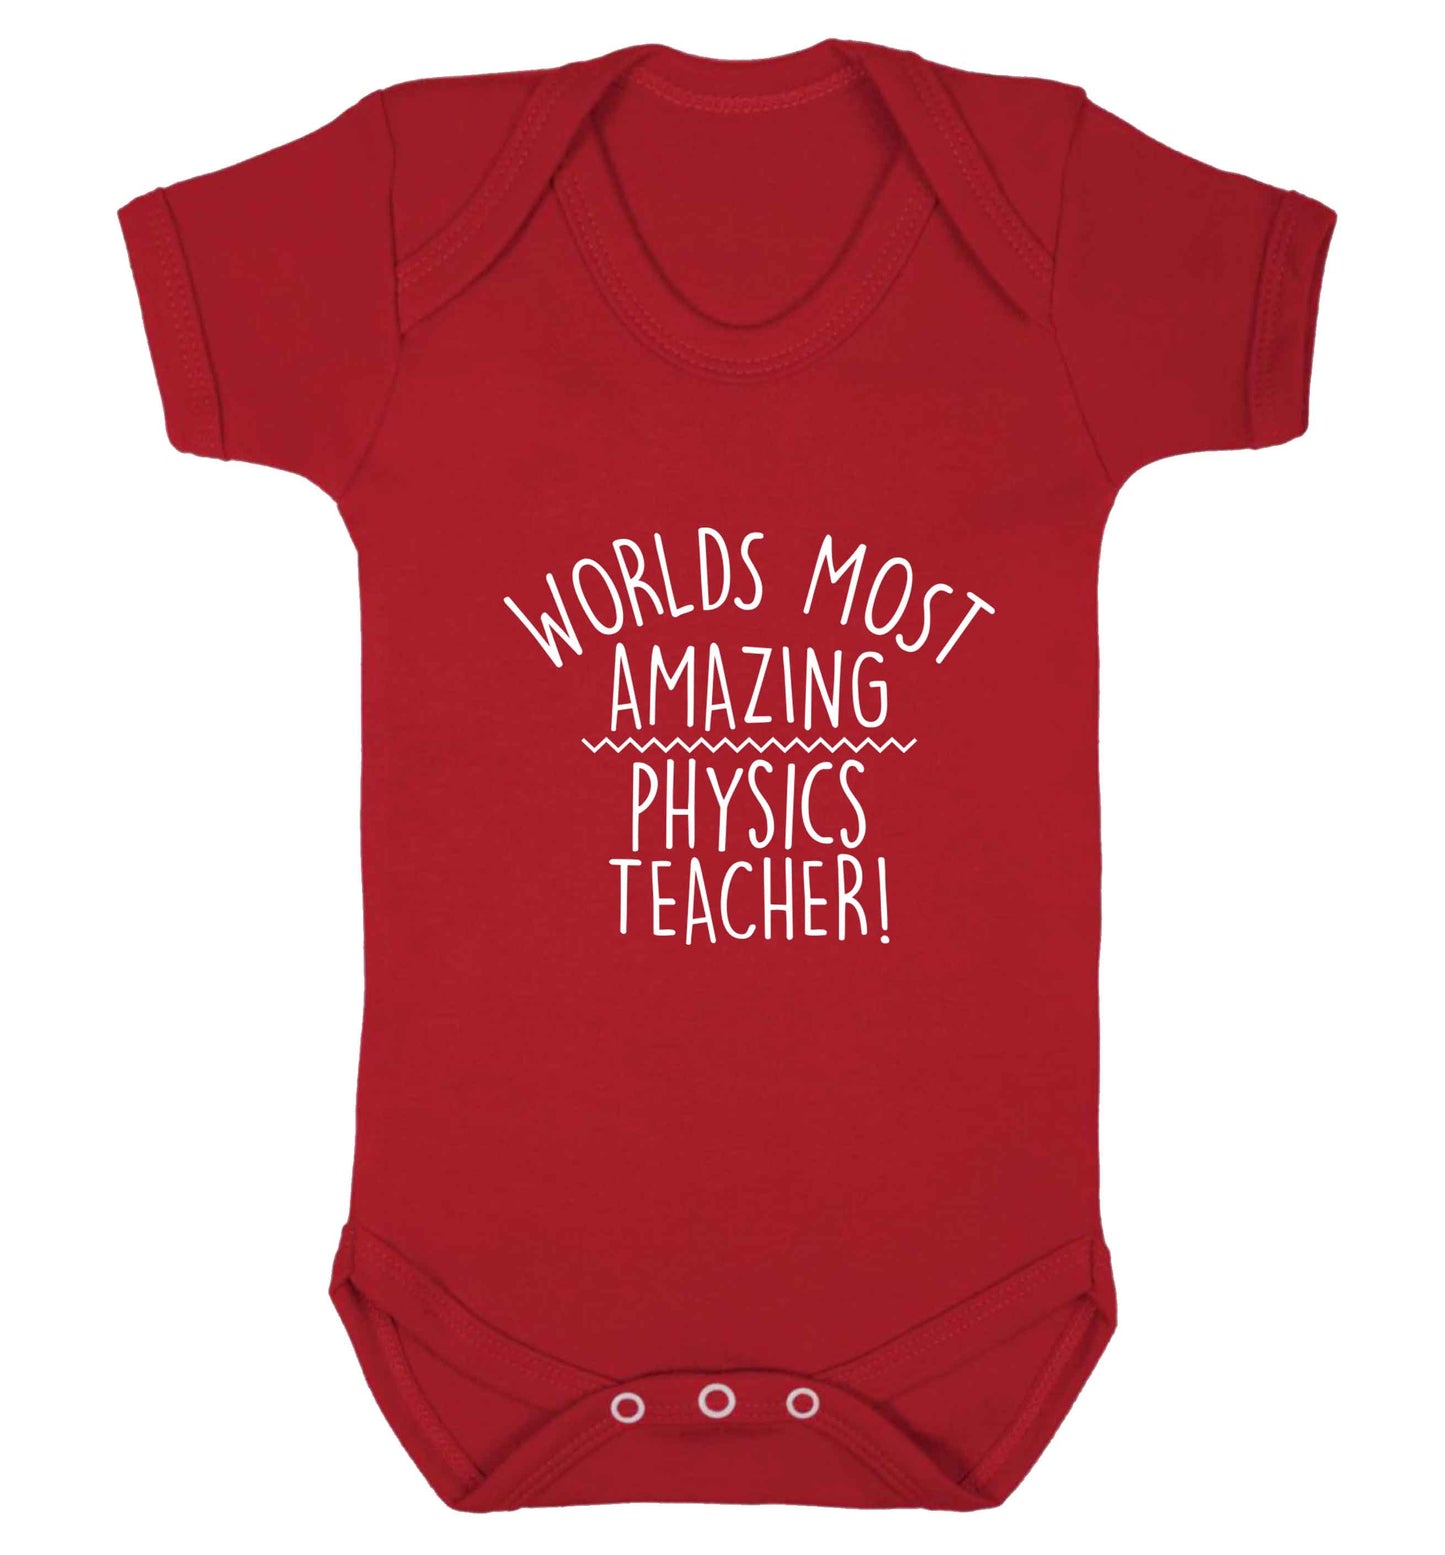 Worlds most amazing physics teacher baby vest red 18-24 months